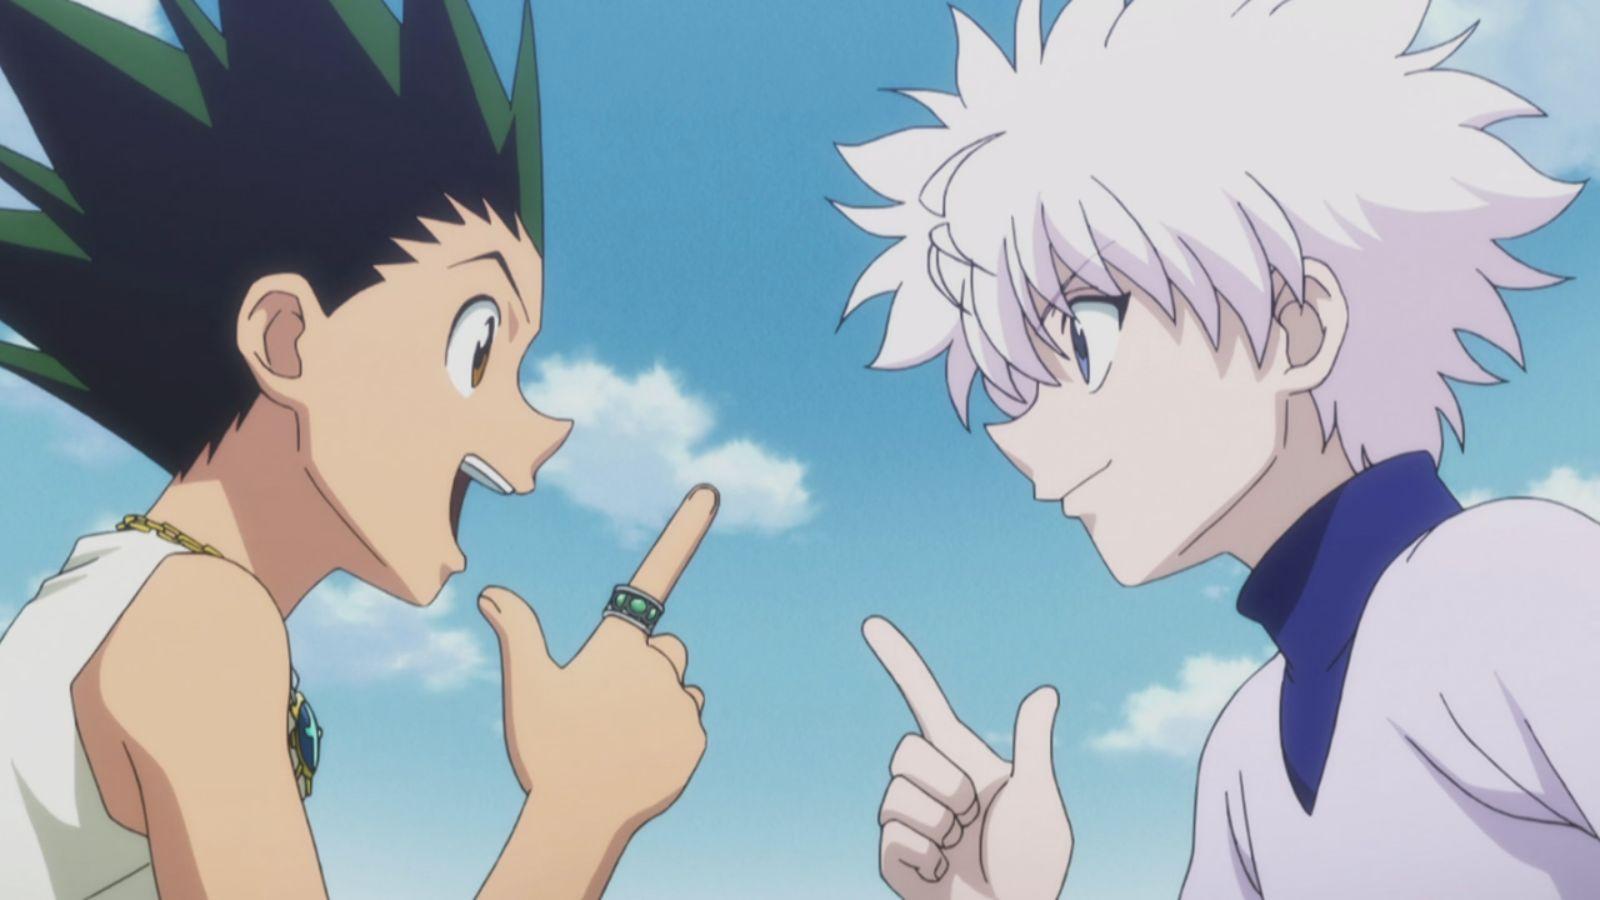 10 characters fans want to see when Hunter x Hunter manga returns